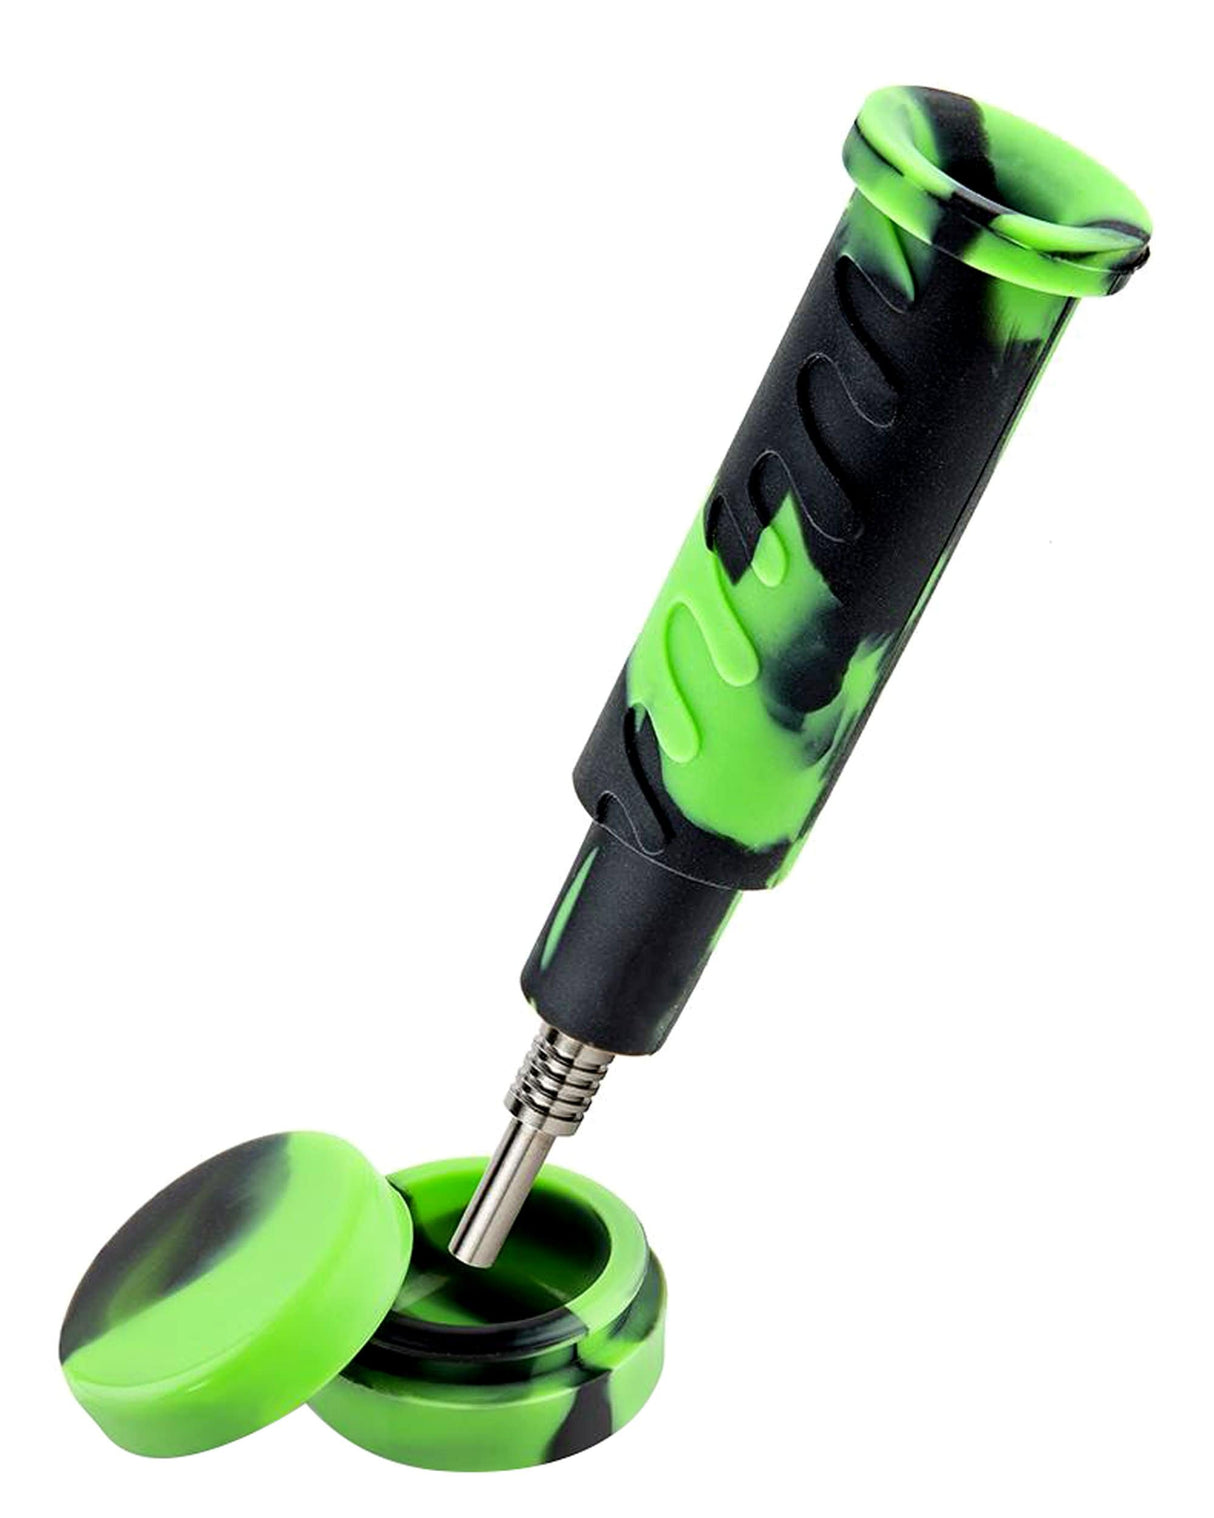 Ooze Cranium Bong & Dab Rig in green, angled view, with silicone body and quartz banger